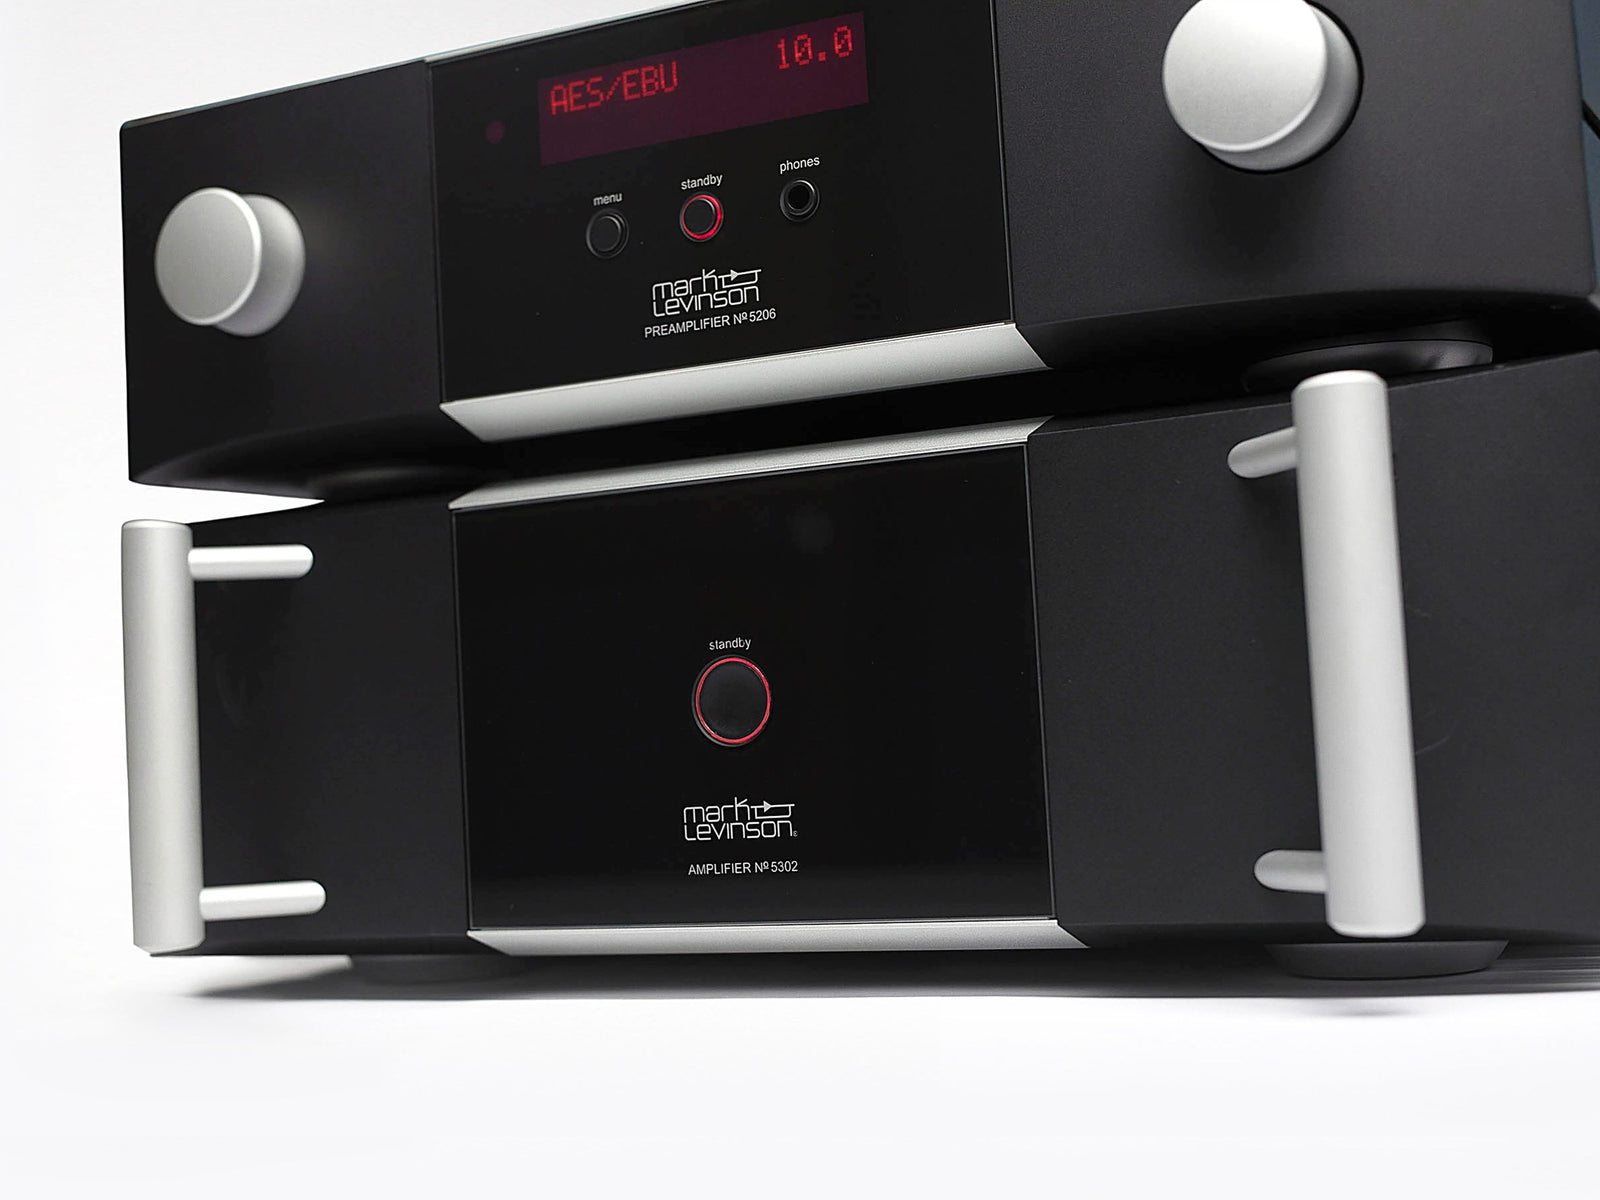 Mark Levinson is an American high-end audio equipment brand, who produce luxury audio systems: amplifiers, phono stages, CD players, DAC, turntables, headphones, amplifiers, integrated amplifier, preamplifiers.